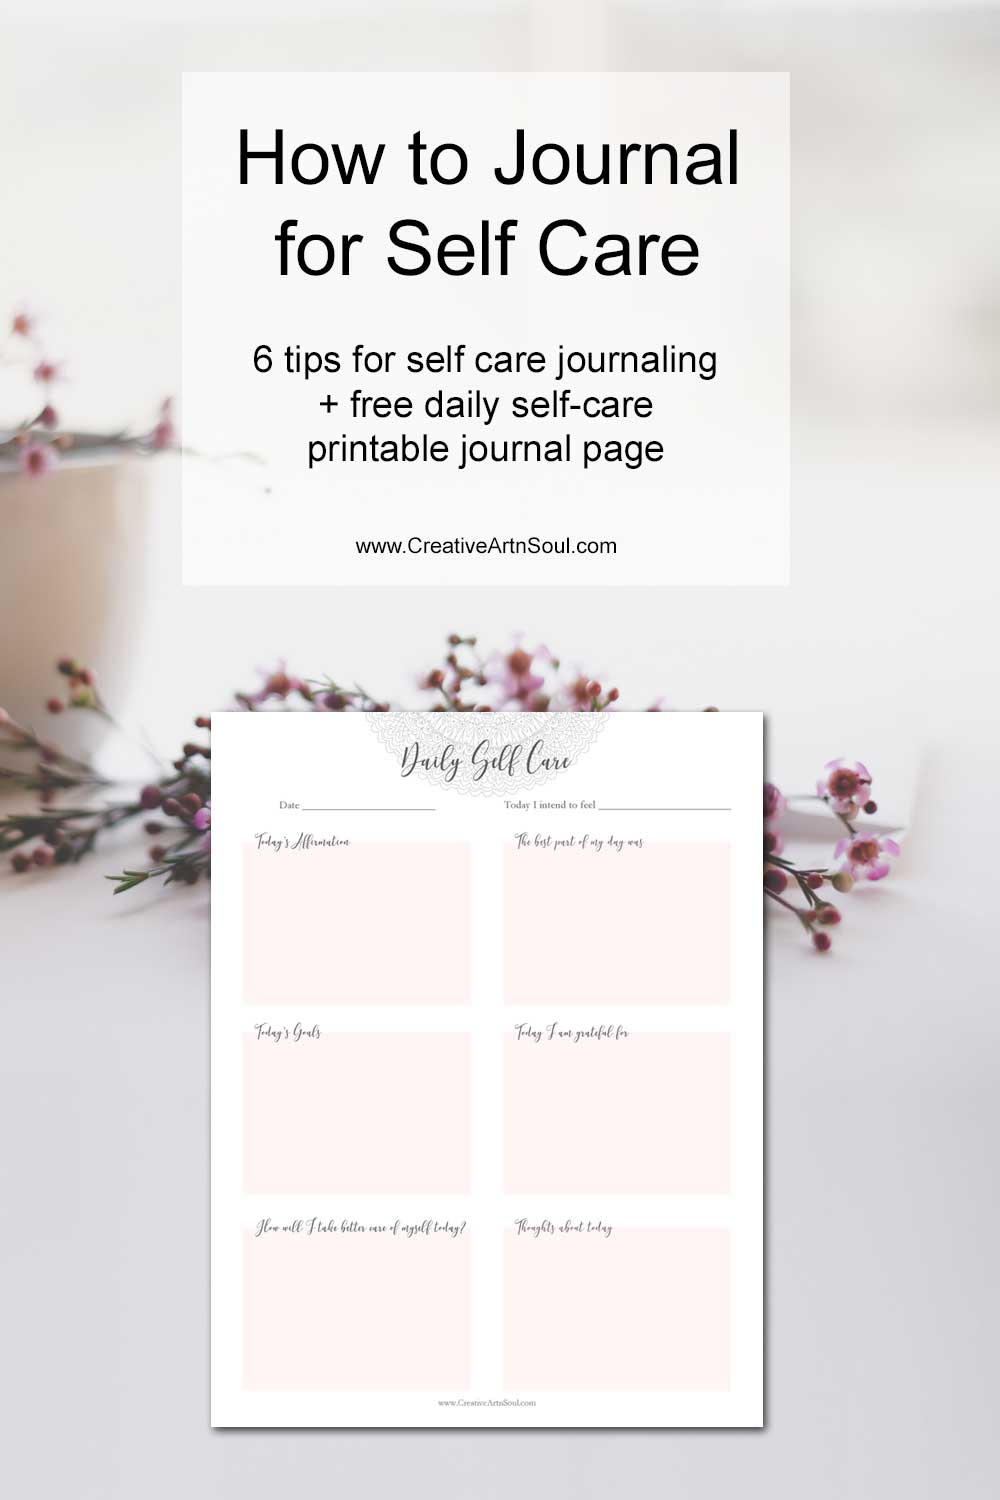 How to Journal for Self Care